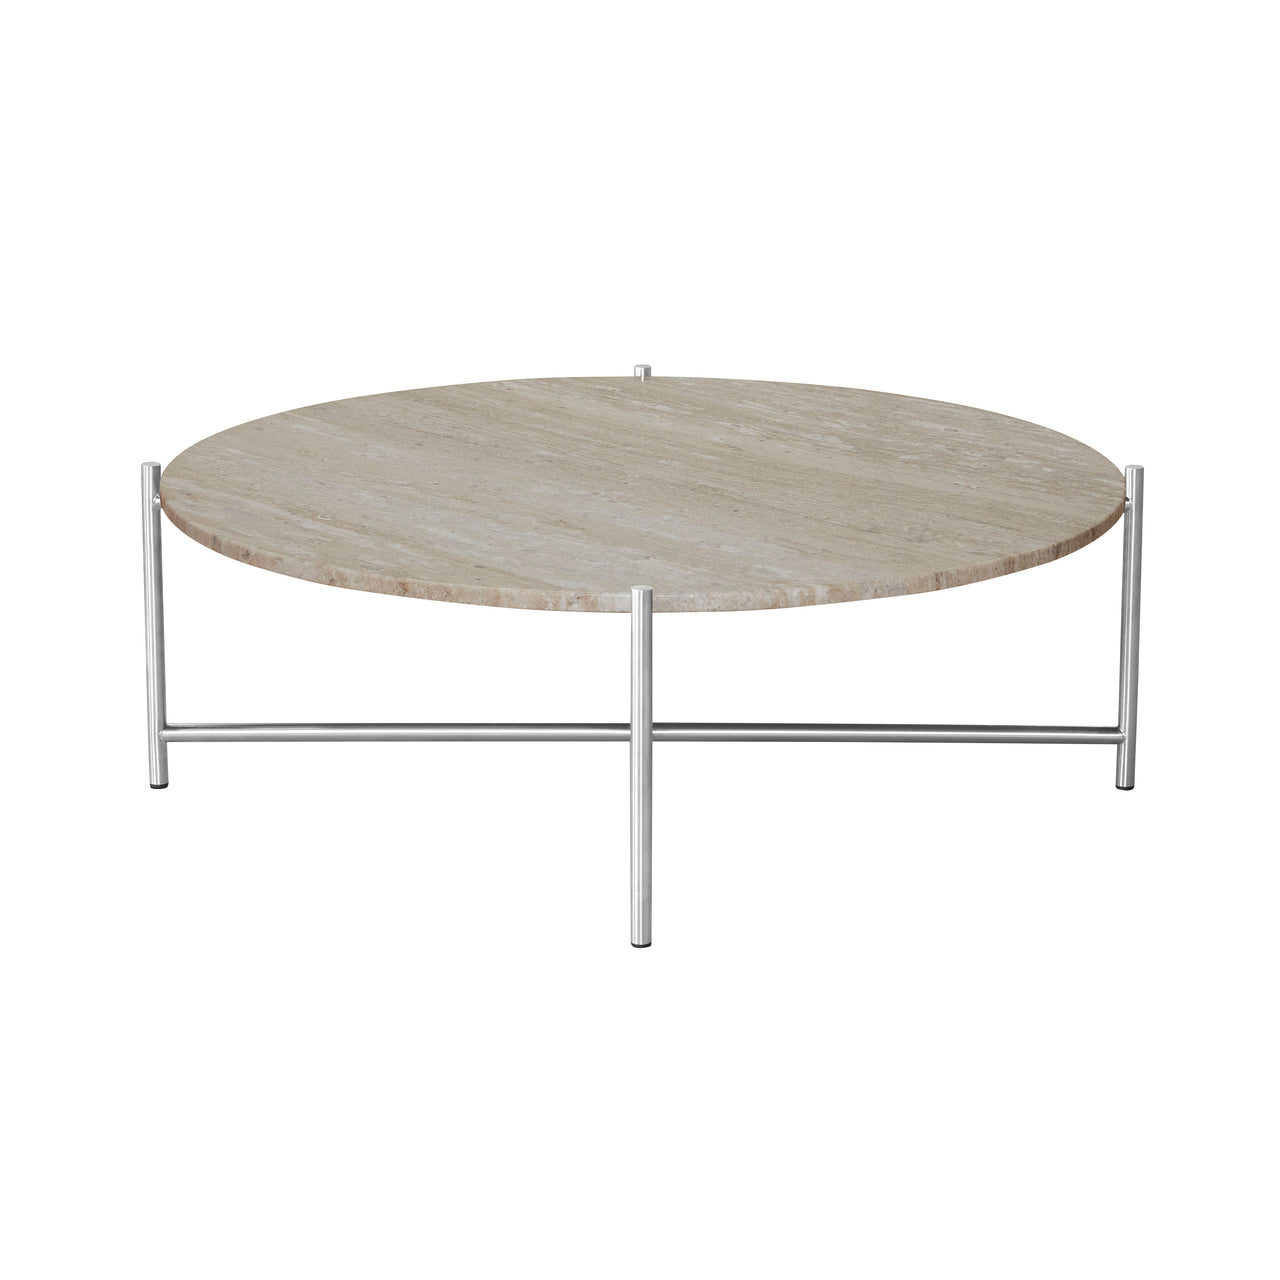 Round Coffee Table: Large - 37.8